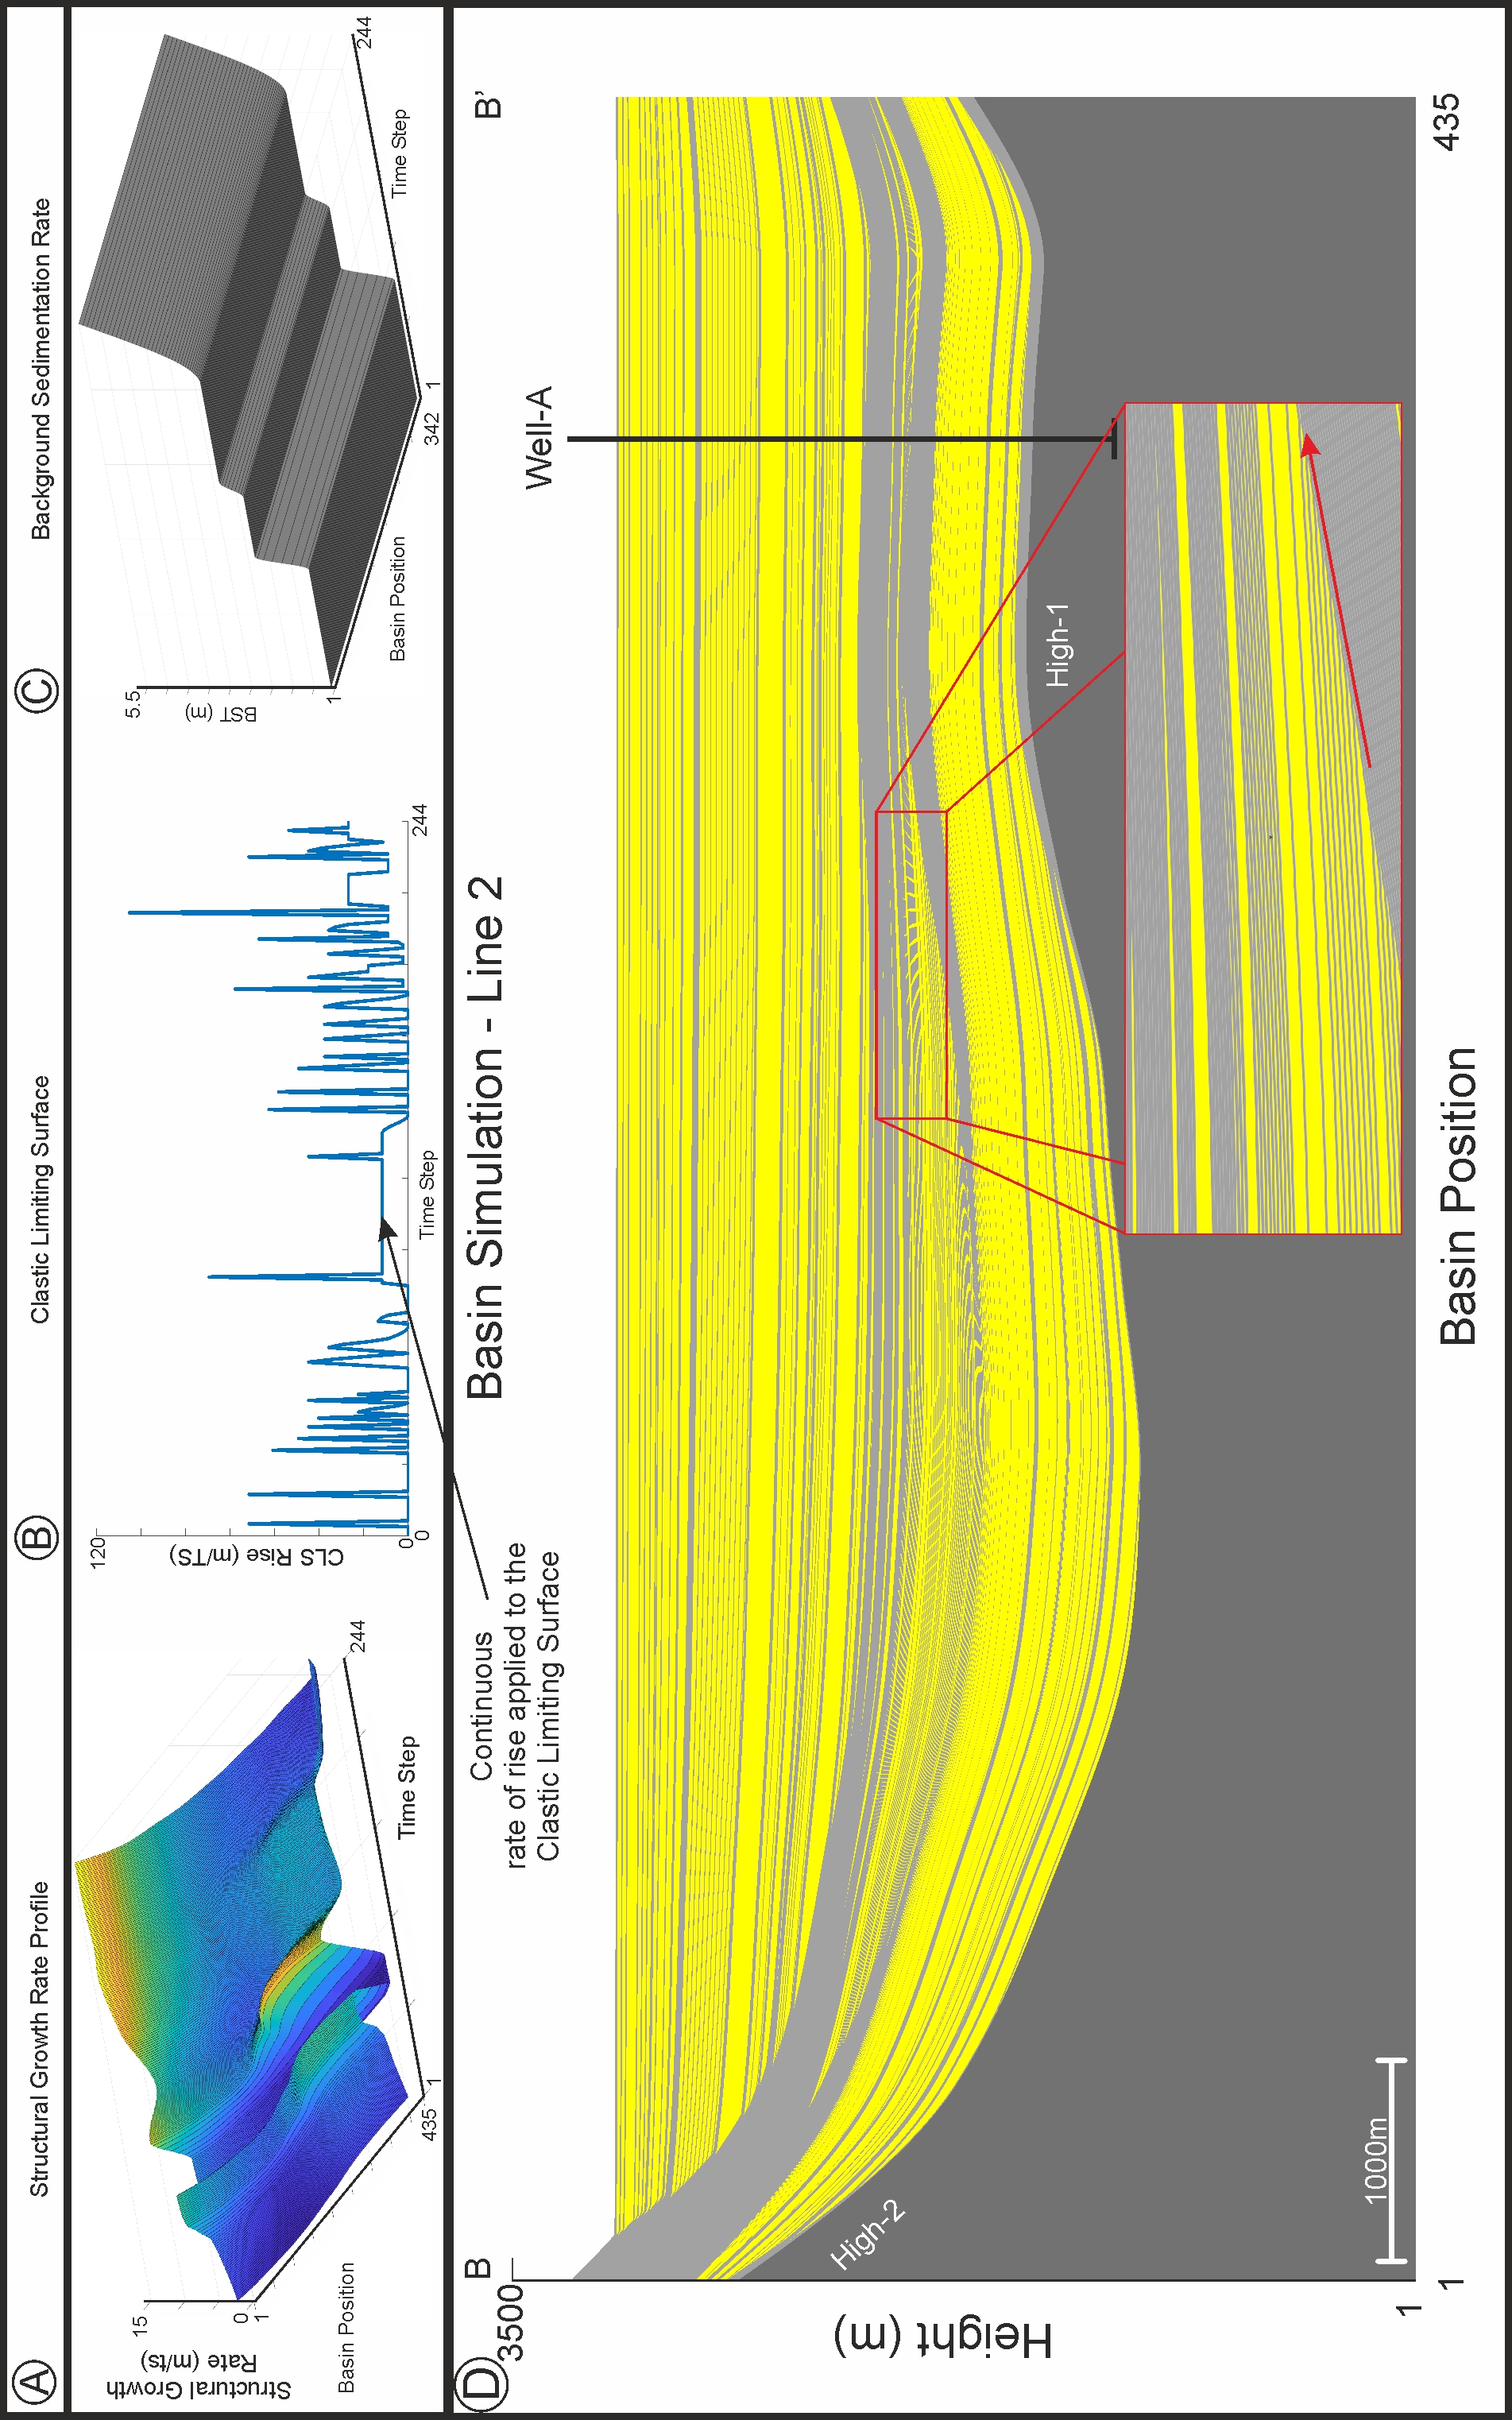 Forward Modelling for Structural Stratigraphic Analysis, Offshore Sureste Basin, Mexico